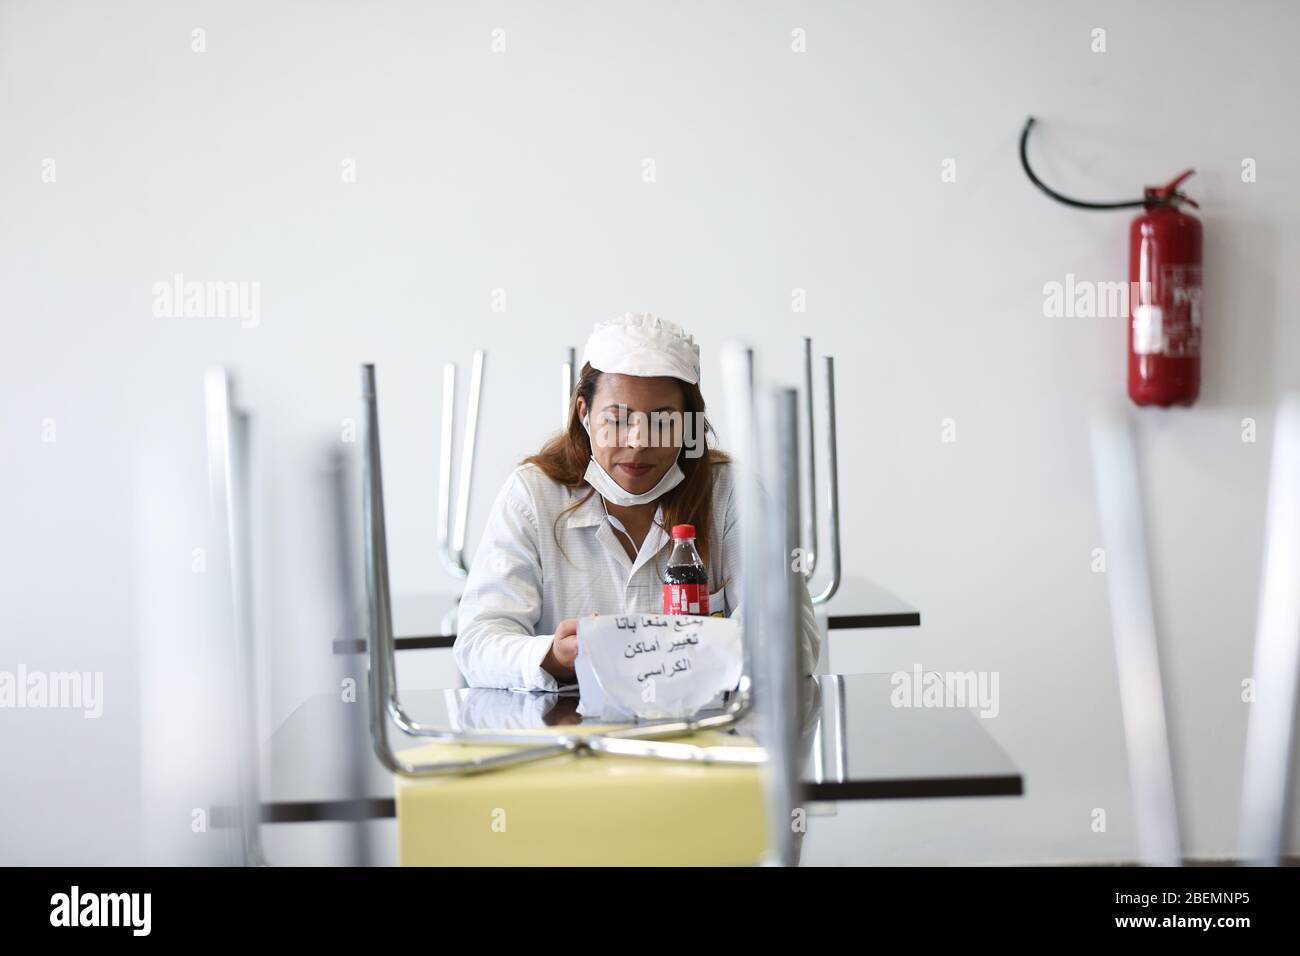 A female factory worker during her fast sits at a table with a note that says 'please dont change chairs places' on Apr. 14, 2020 in Industrial Zone Agba, Manouba, Tunisia. After the announcement of total containment throughout Tunisia on March 22, 2020, factories and viral sectors are continuing their activities while respecting the precautions against the pandemic of CoViD-19. This story follows the daily routine of workers at Marquardt Tunisia automotive factory in Manouba, Tunisia during the Covid-19 coronavirus pandemic. (Photo by Mohamed Krit/Sipa USA) Stock Photo